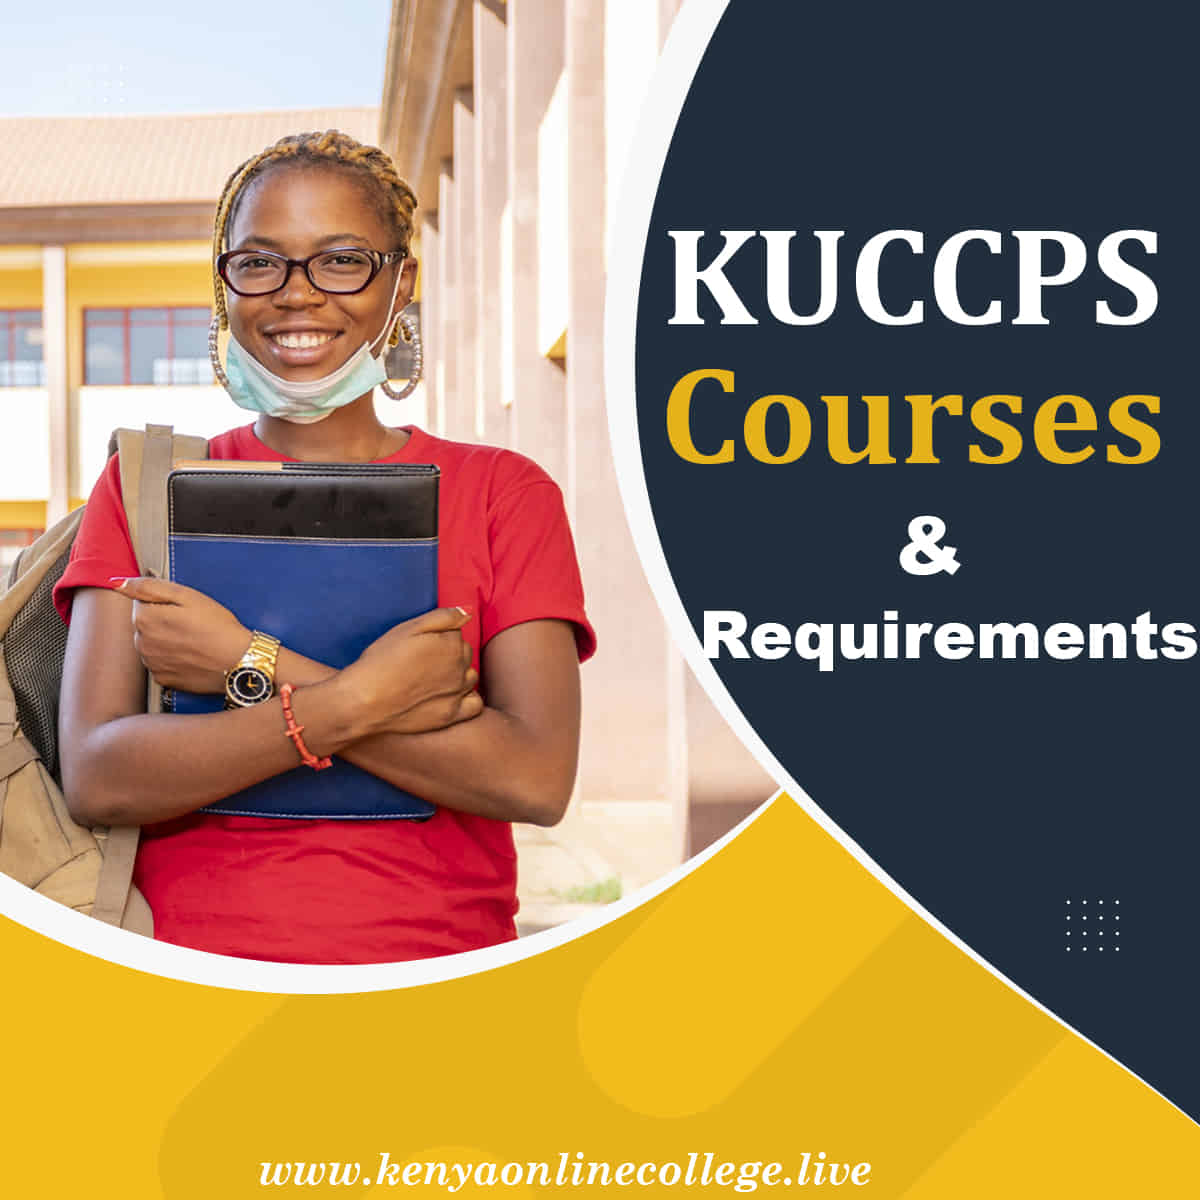 KUCCPS courses and requirements